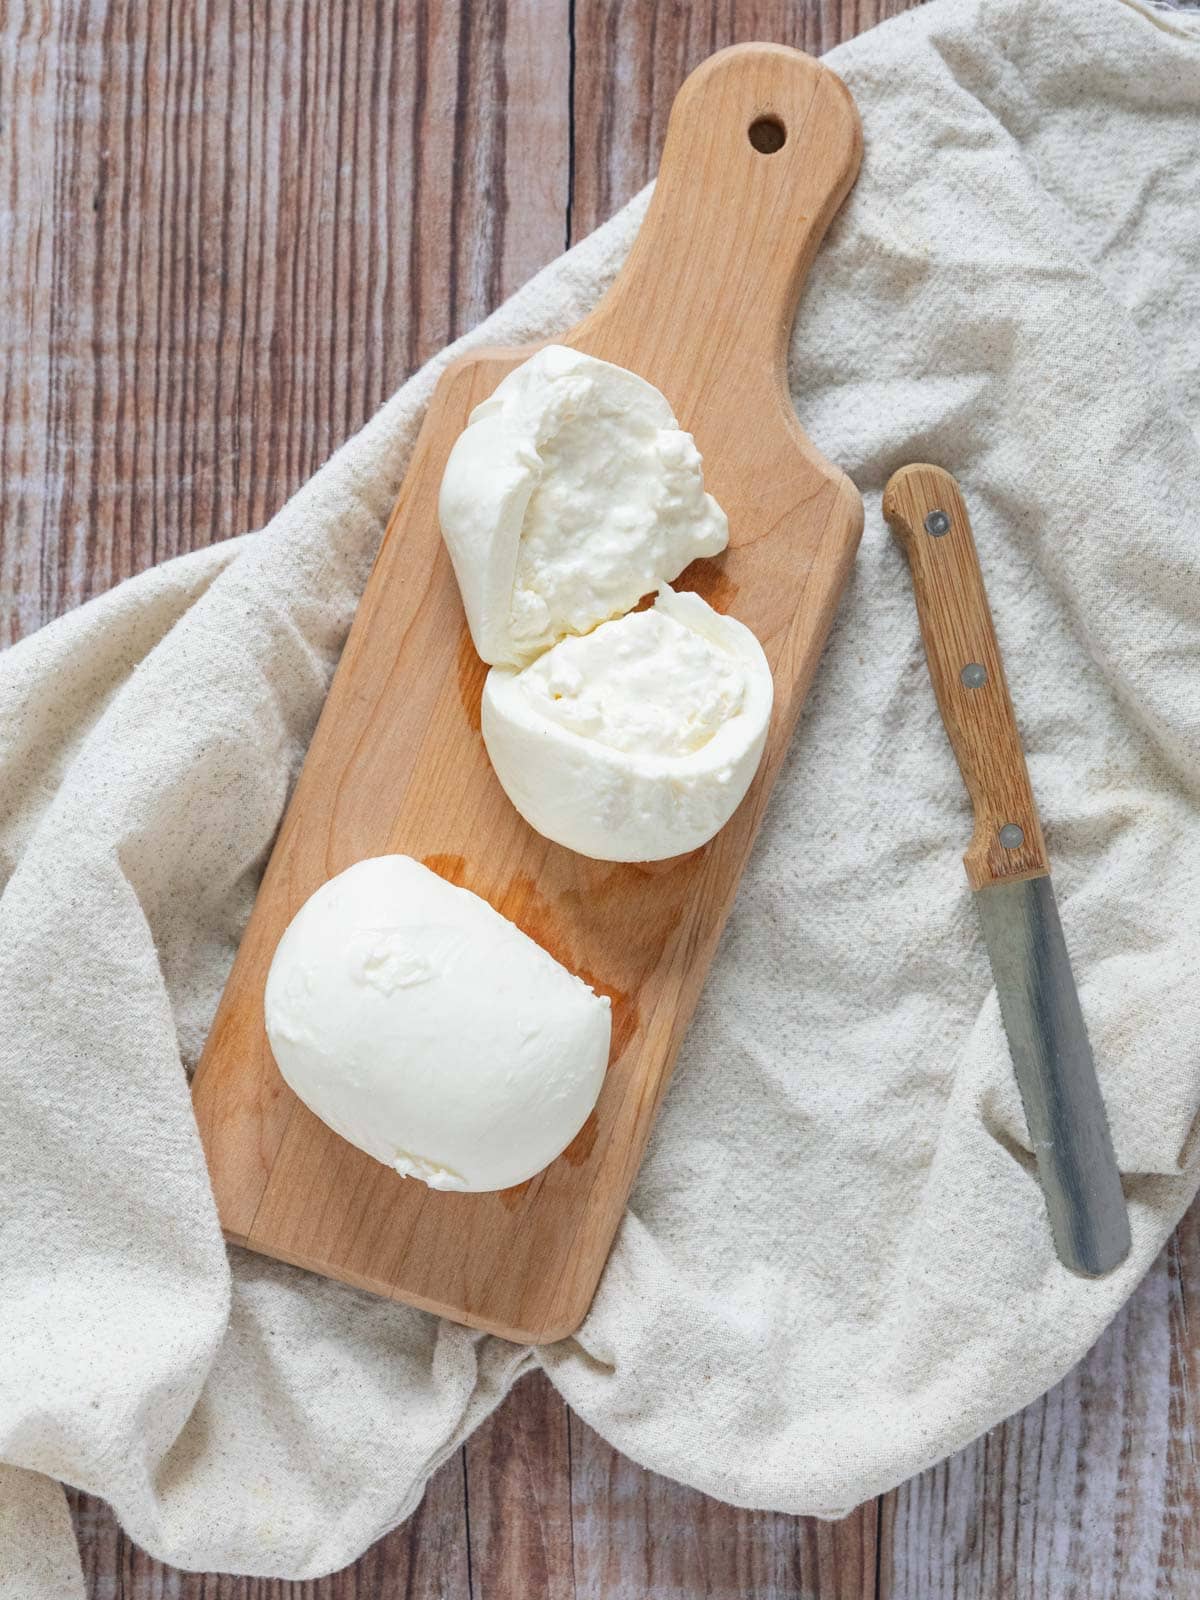 burrata cheese on a wooden cutting board, cut open to see the middle with a cheese knife.